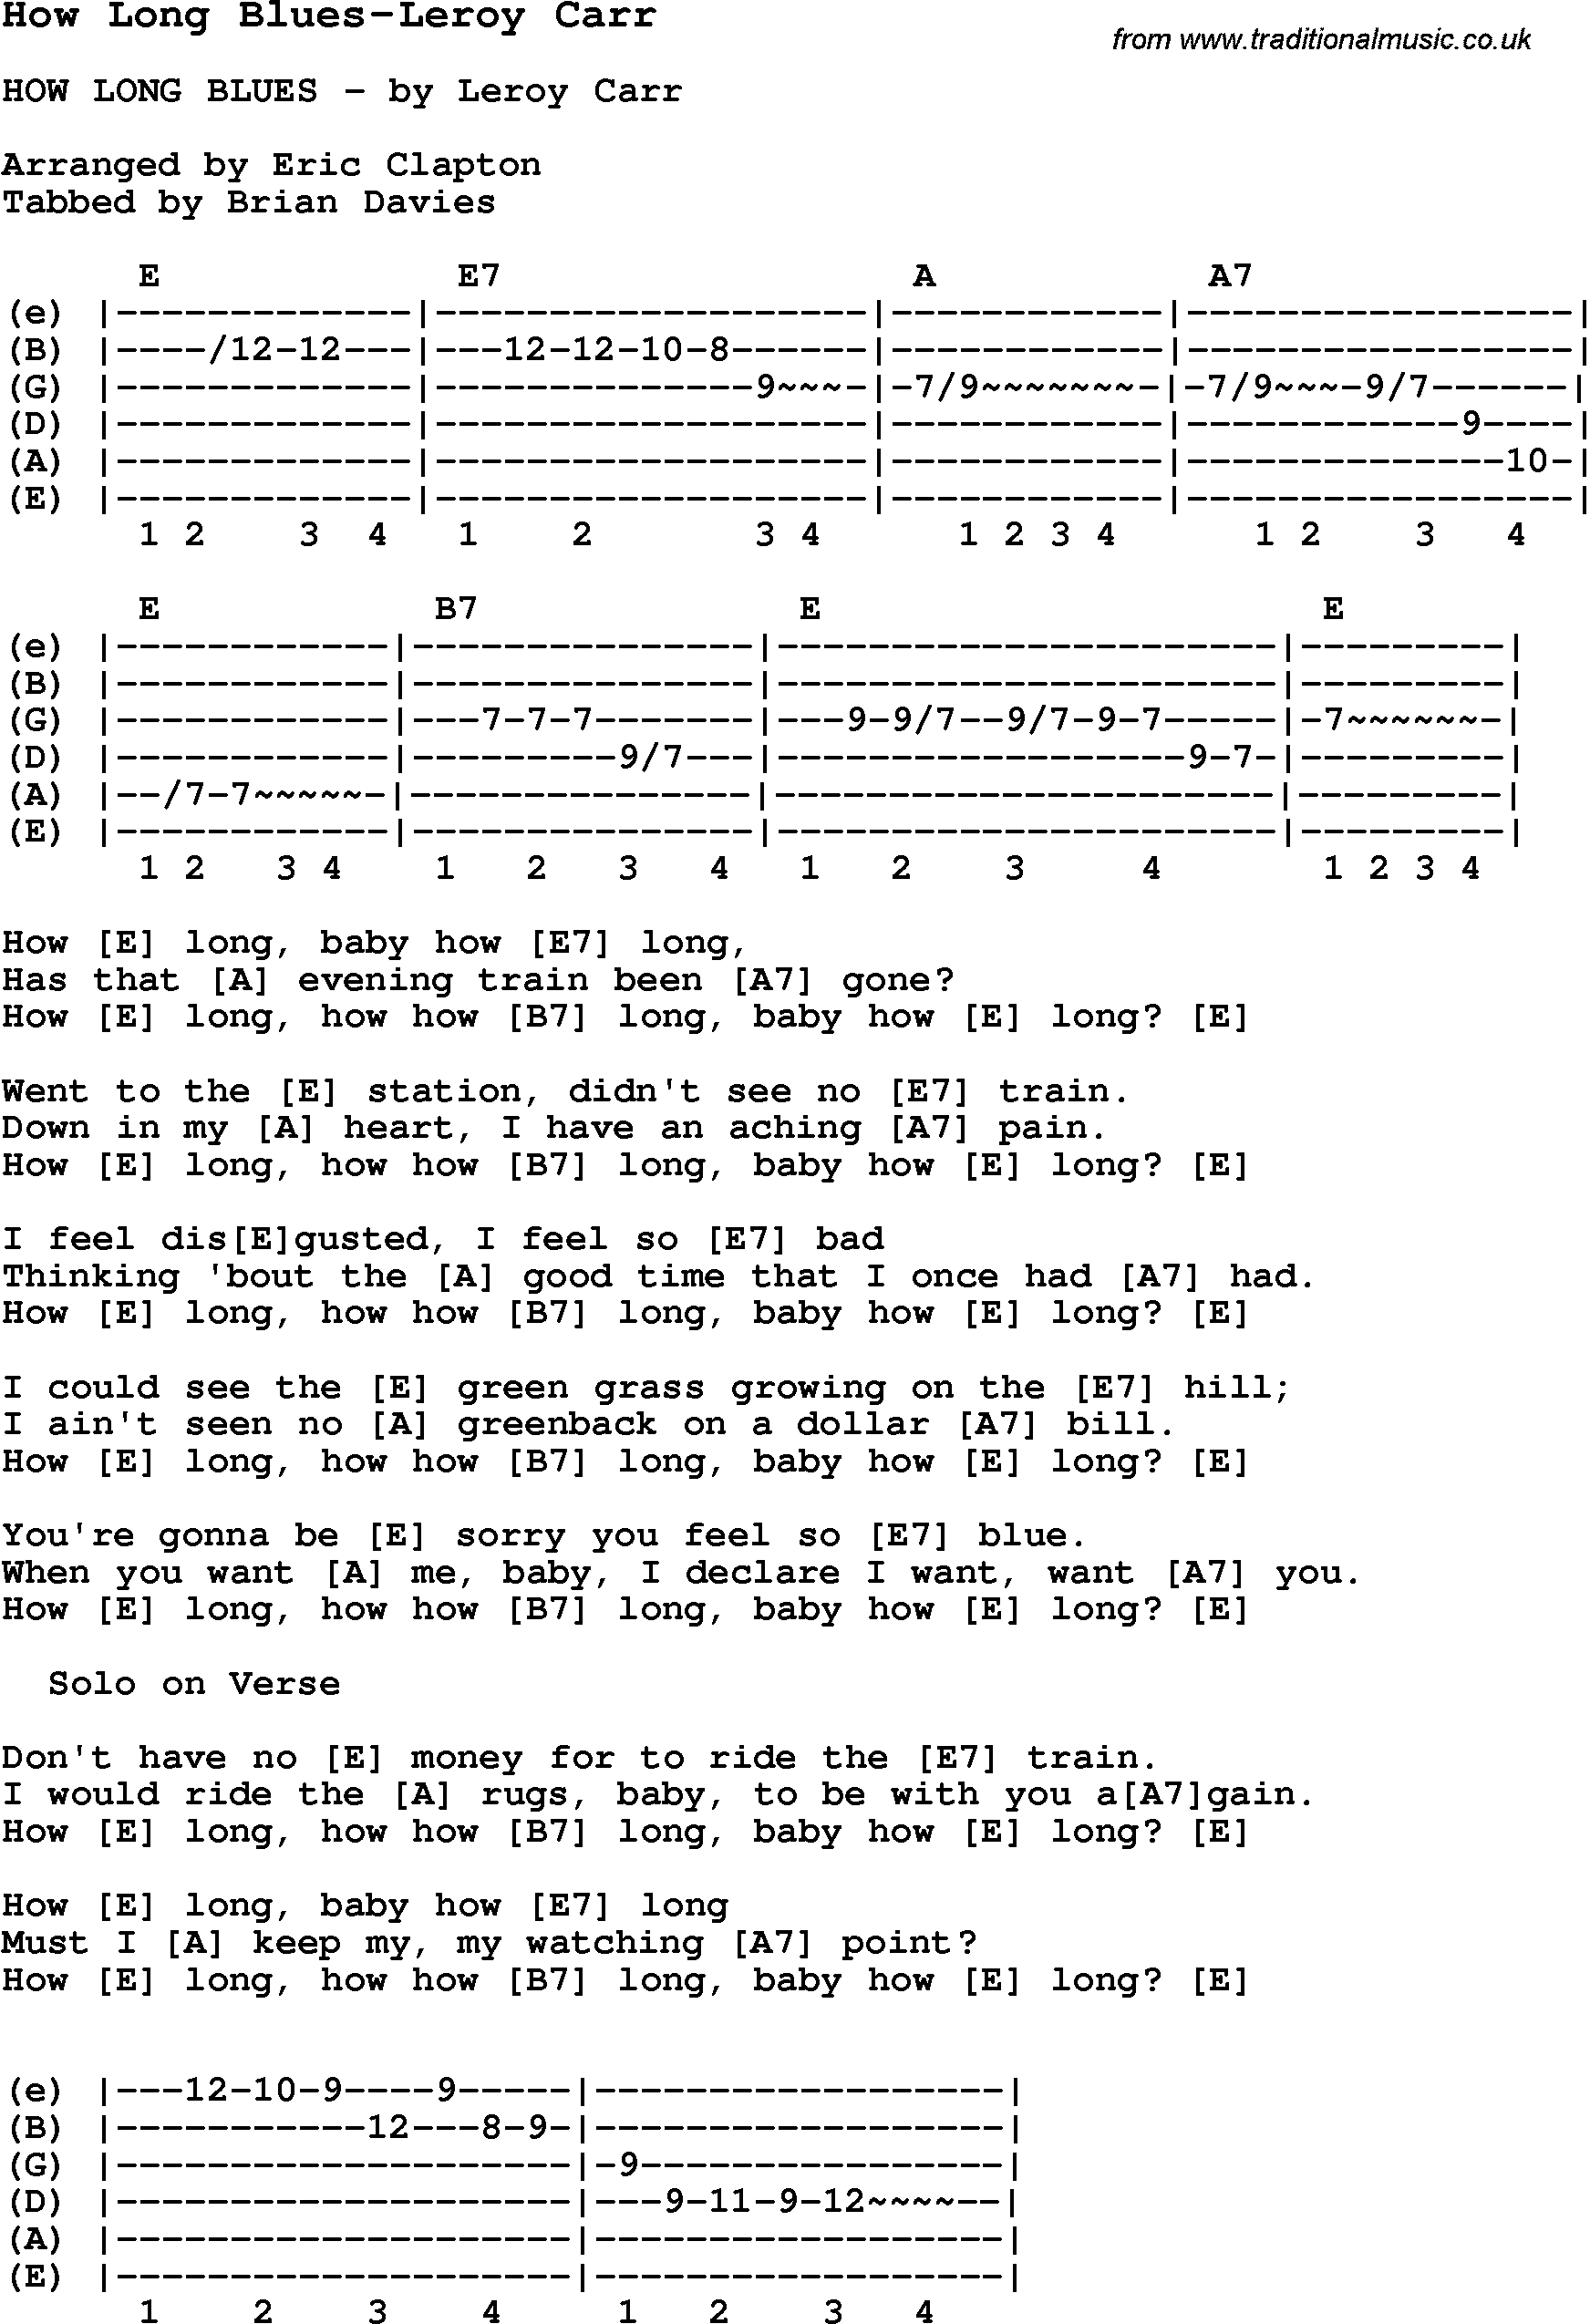 Blues Guitar Song, lyrics, chords, tablature, playing hints for How Long Blues-Leroy Carr